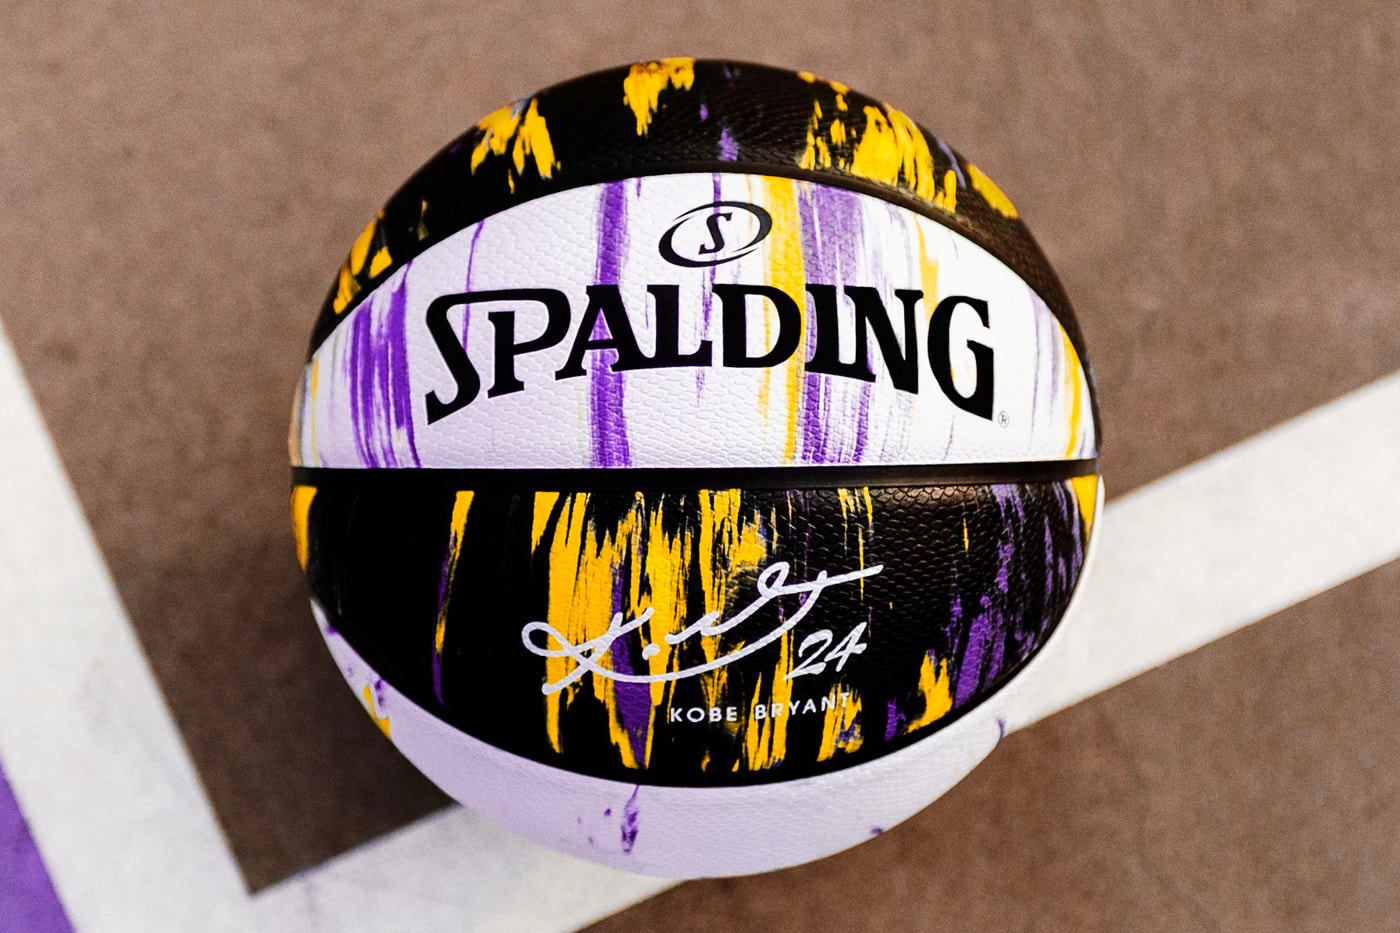 Spalding limited edition Kobe Marbled Snake Basketball ball bryant sports 8 24 gold purple snakeskin silver shooting guard signature